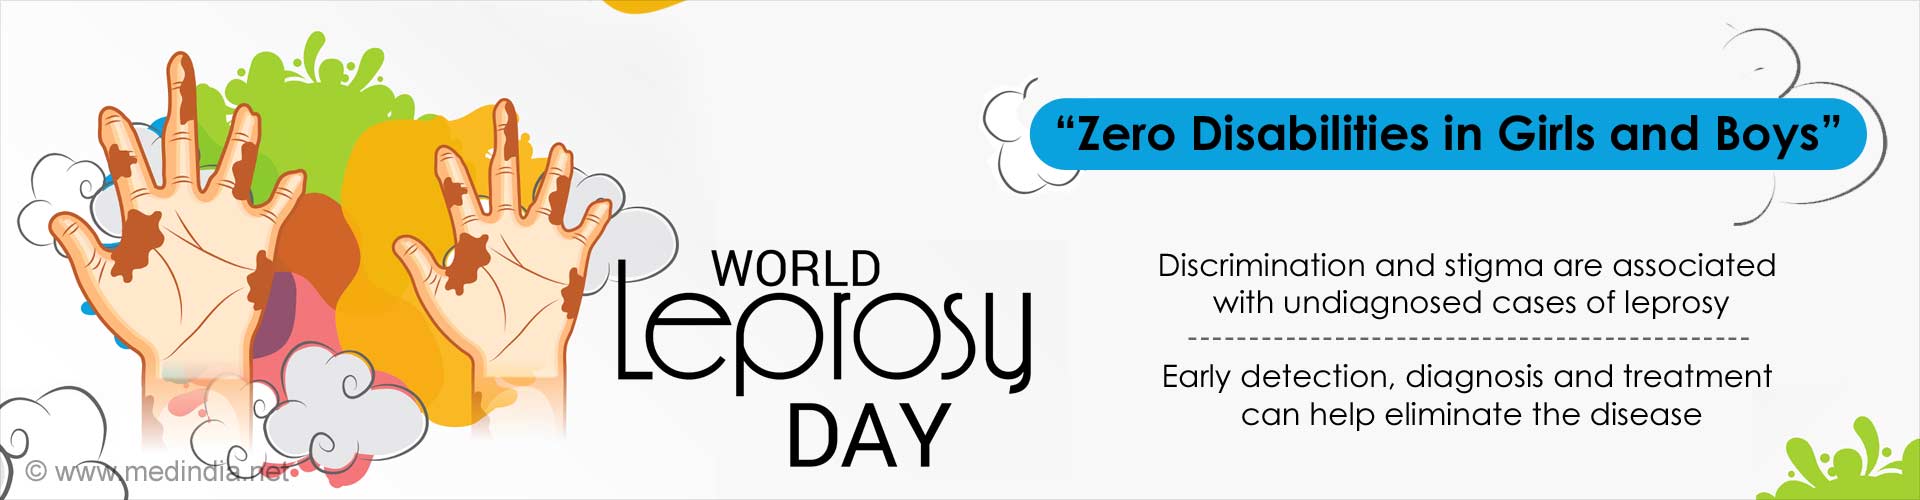 Zero disabilities in girls and boys
- discrimination and stigma are associates with undiagnosed cases of leprosy
- early detection, diagnosis and treatment can help eliminate the disease
